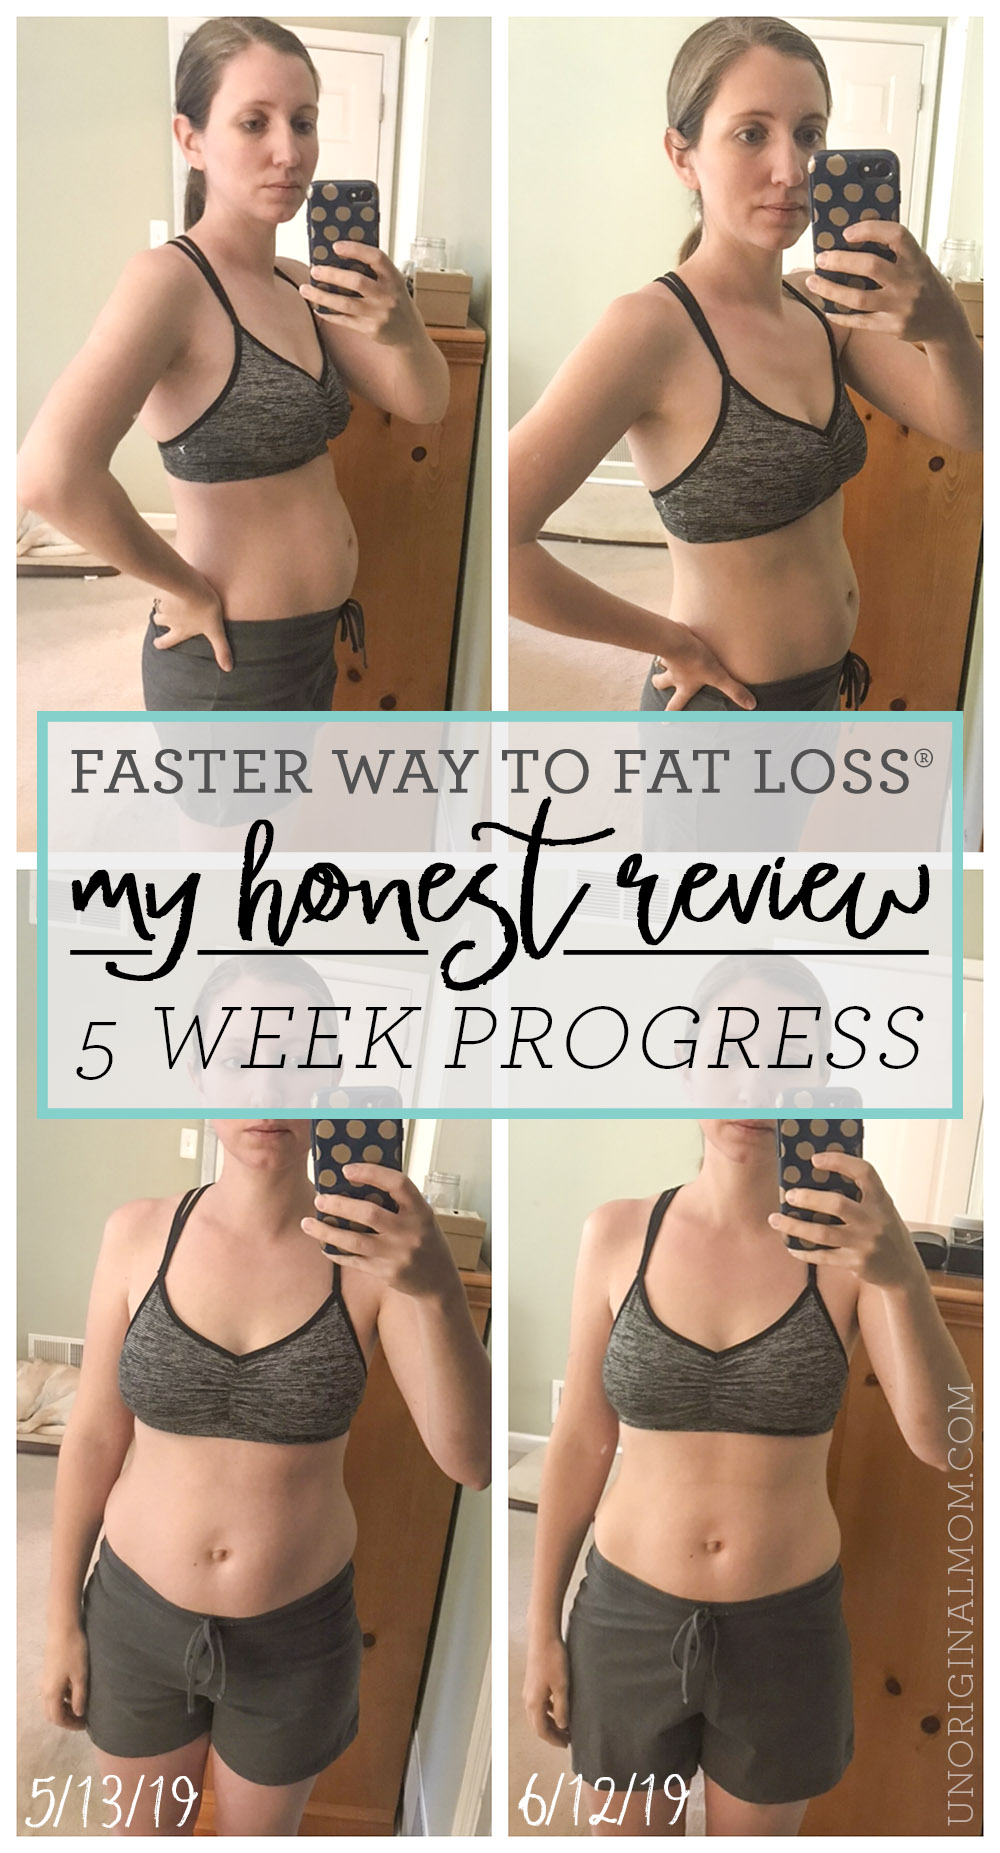 Faster Way to Fat Loss Honest Review - a detailed review of the Faster Way to Fat Loss program including pros and cons, results, and recommendations.